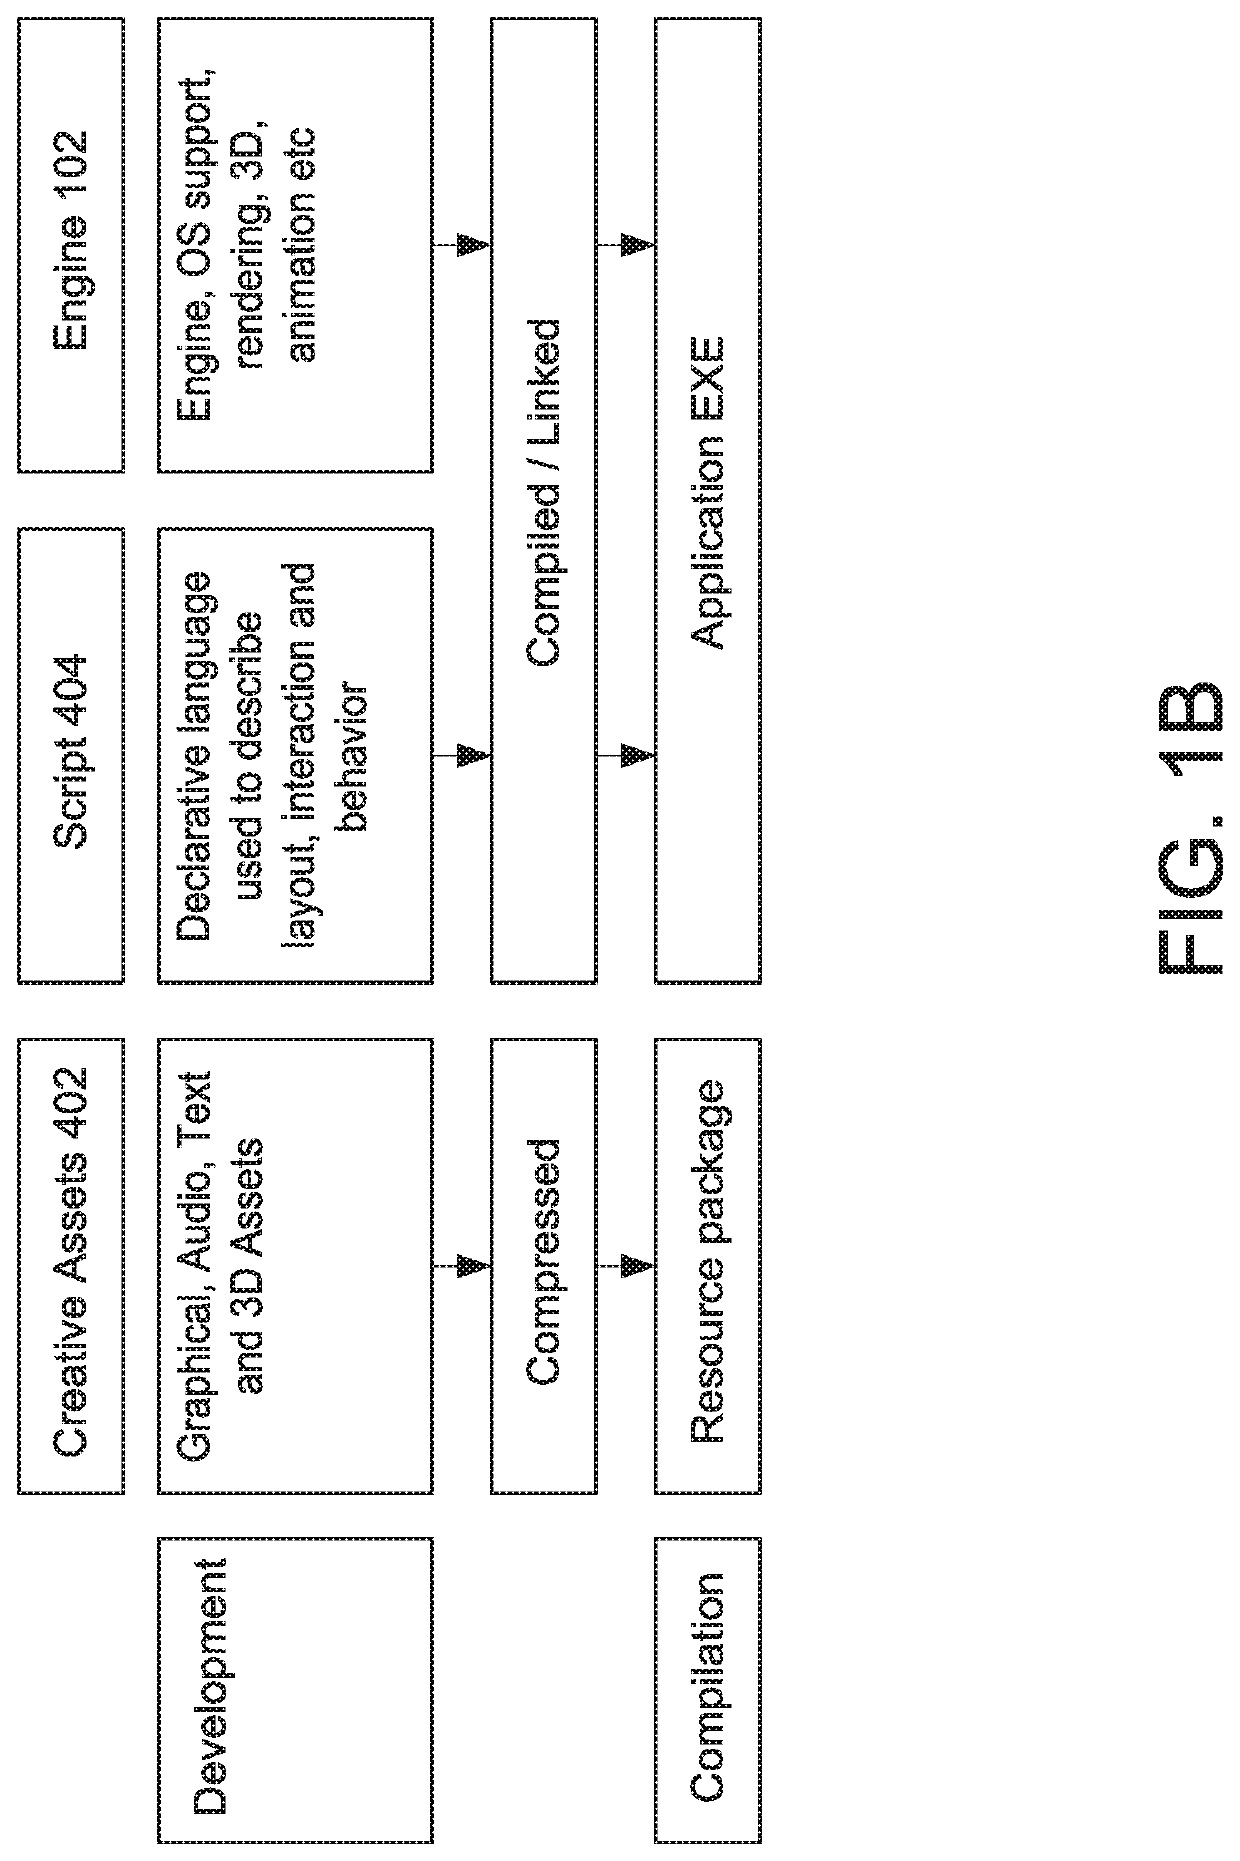 Systems and methods for providing digital twin-enabled applications